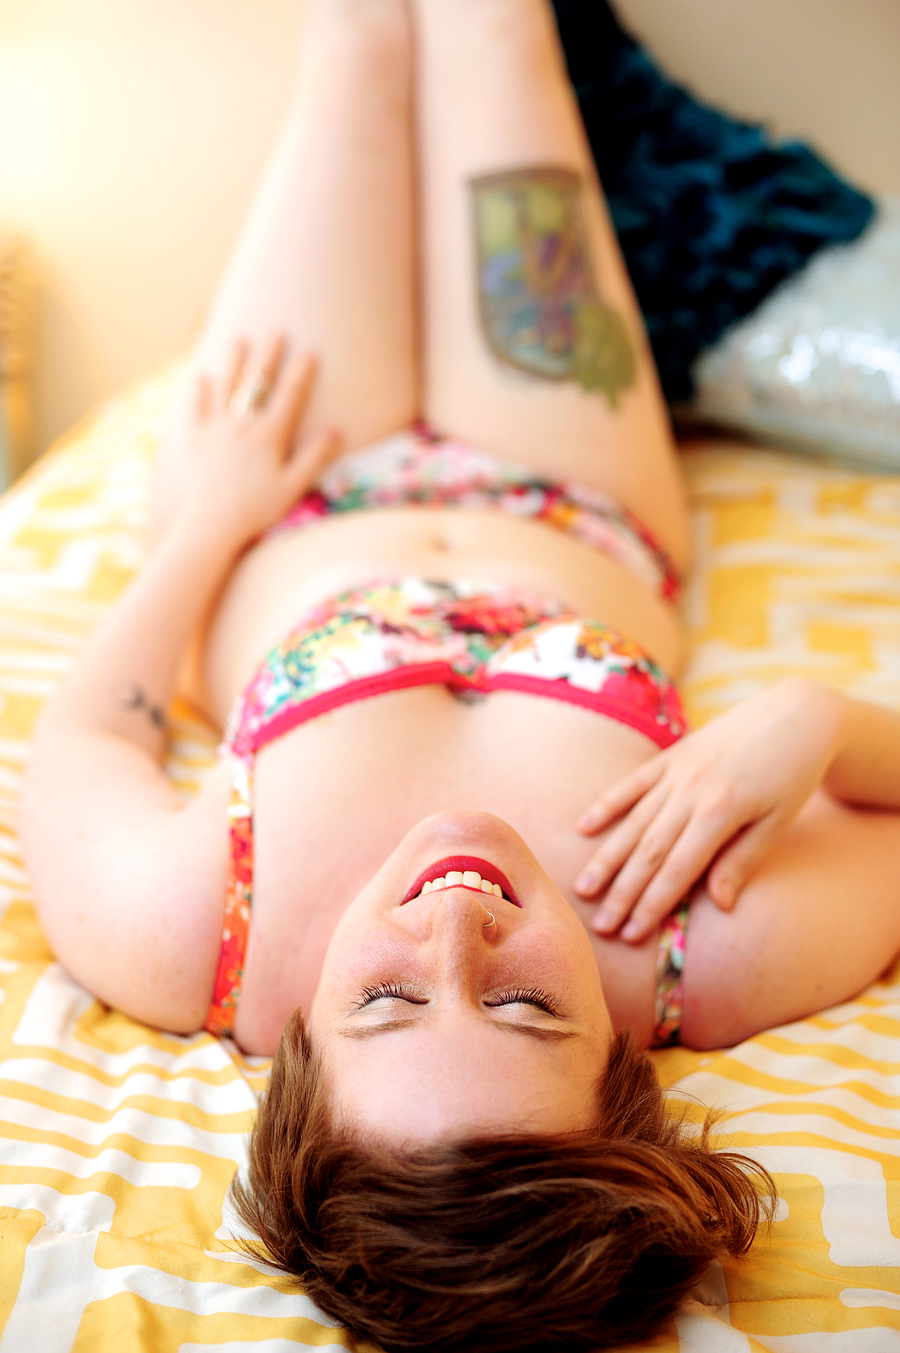 boudoir session with floral lingerie and tattoos